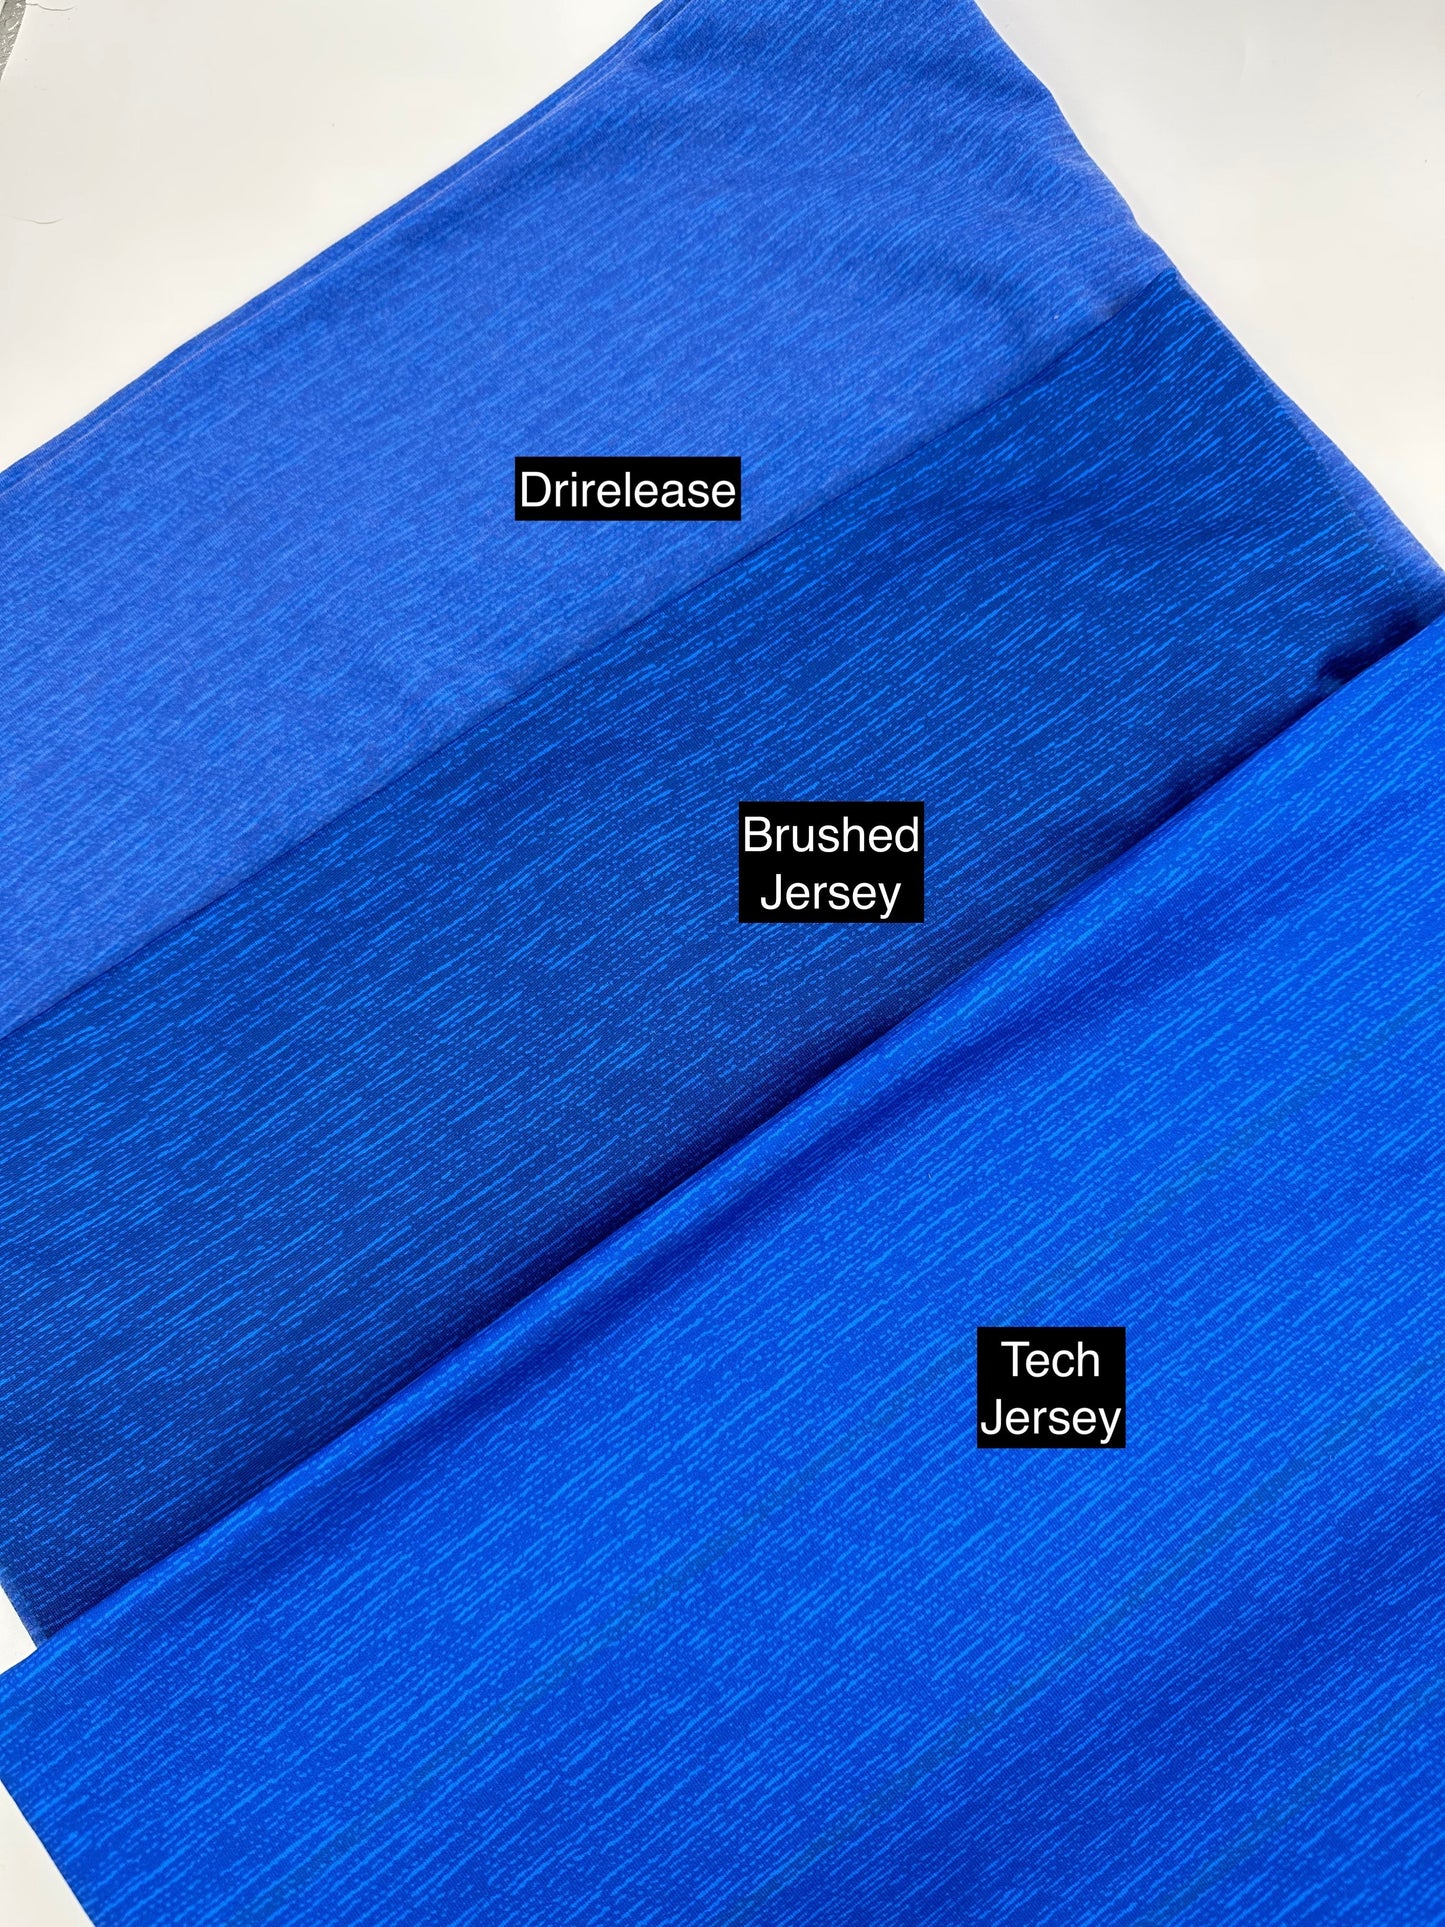 Brushed Jersey: Royal Azure Printed Woven Texture